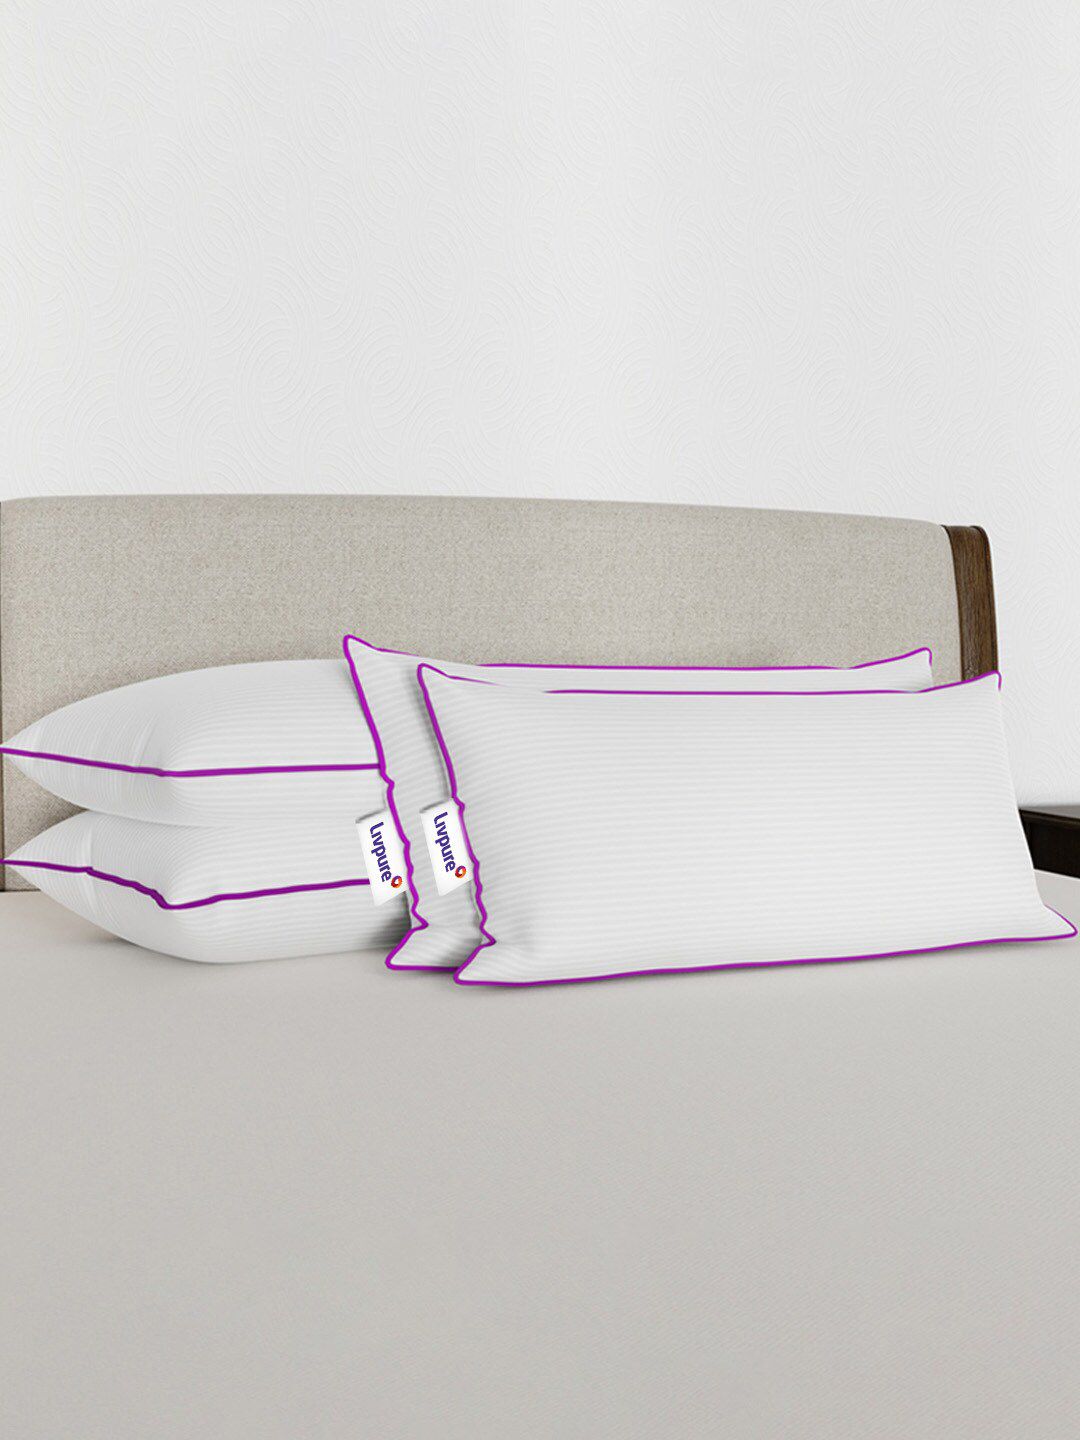 Livpure Smart White Solid Pillows Price in India